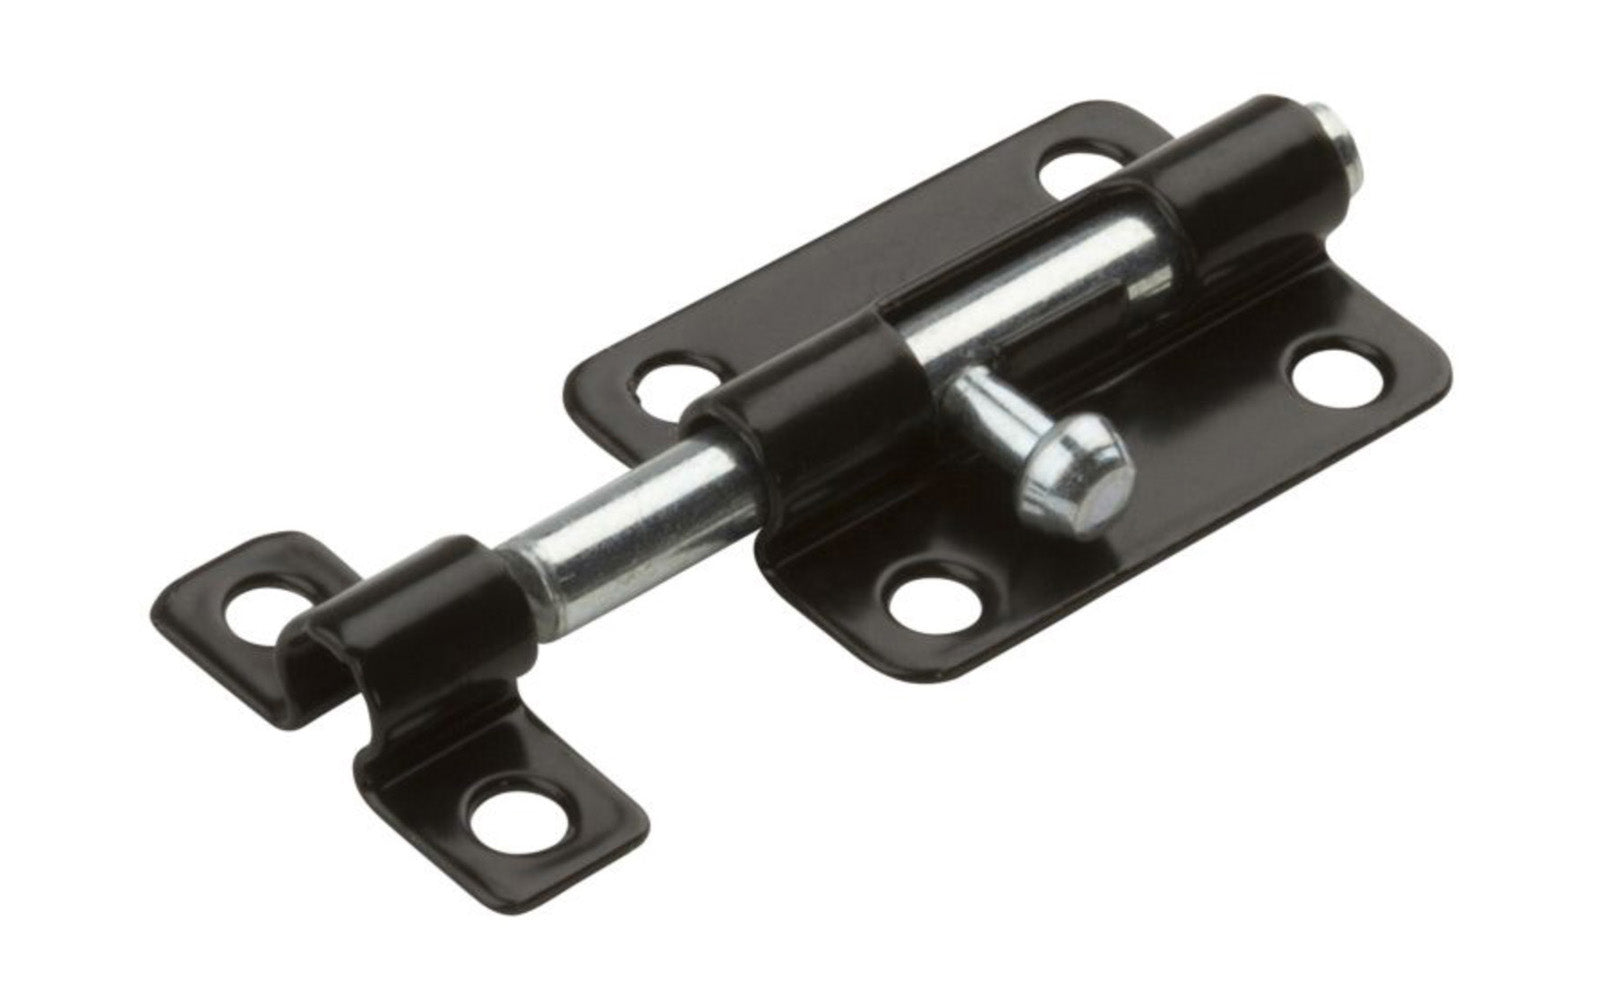 This 3" Black Finish Barrel Bolt is designed for security applications on lightweight doors, chests, & cabinets. Use on vertical, horizontal, left or right hand applications. Includes six black phillips screws. 3" width x 1-1/2" height. National Hardware Model No. N151-522. 038613151529